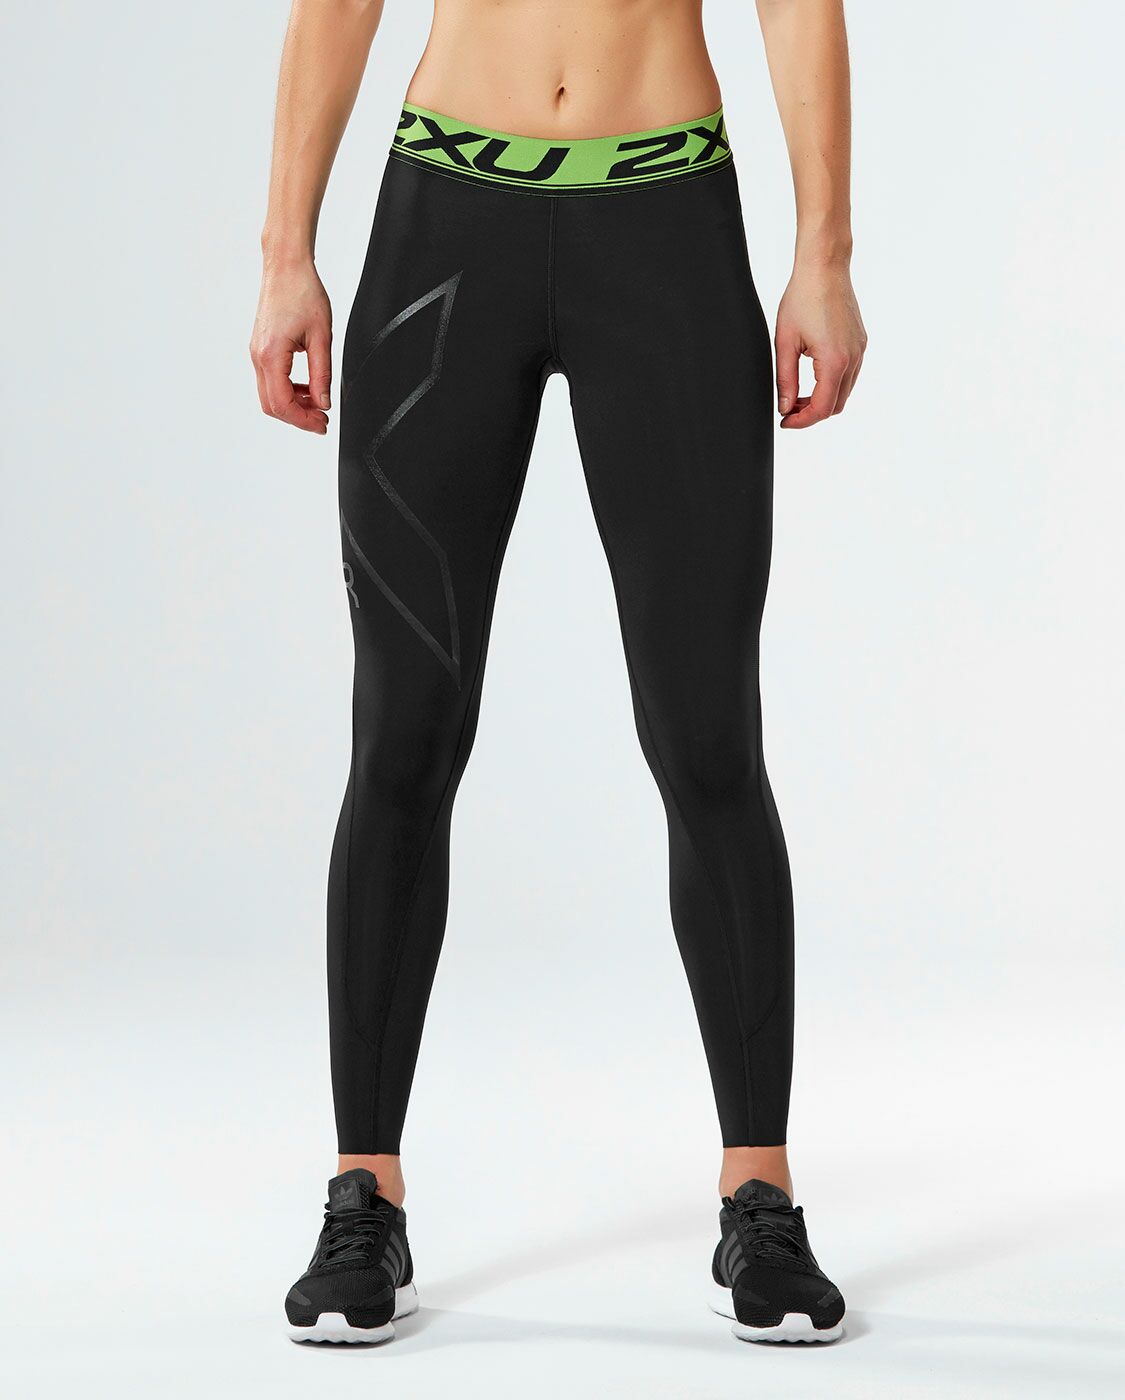 2XU South Africa - Womens Refresh Recovery Compression Tights - Black/Nero